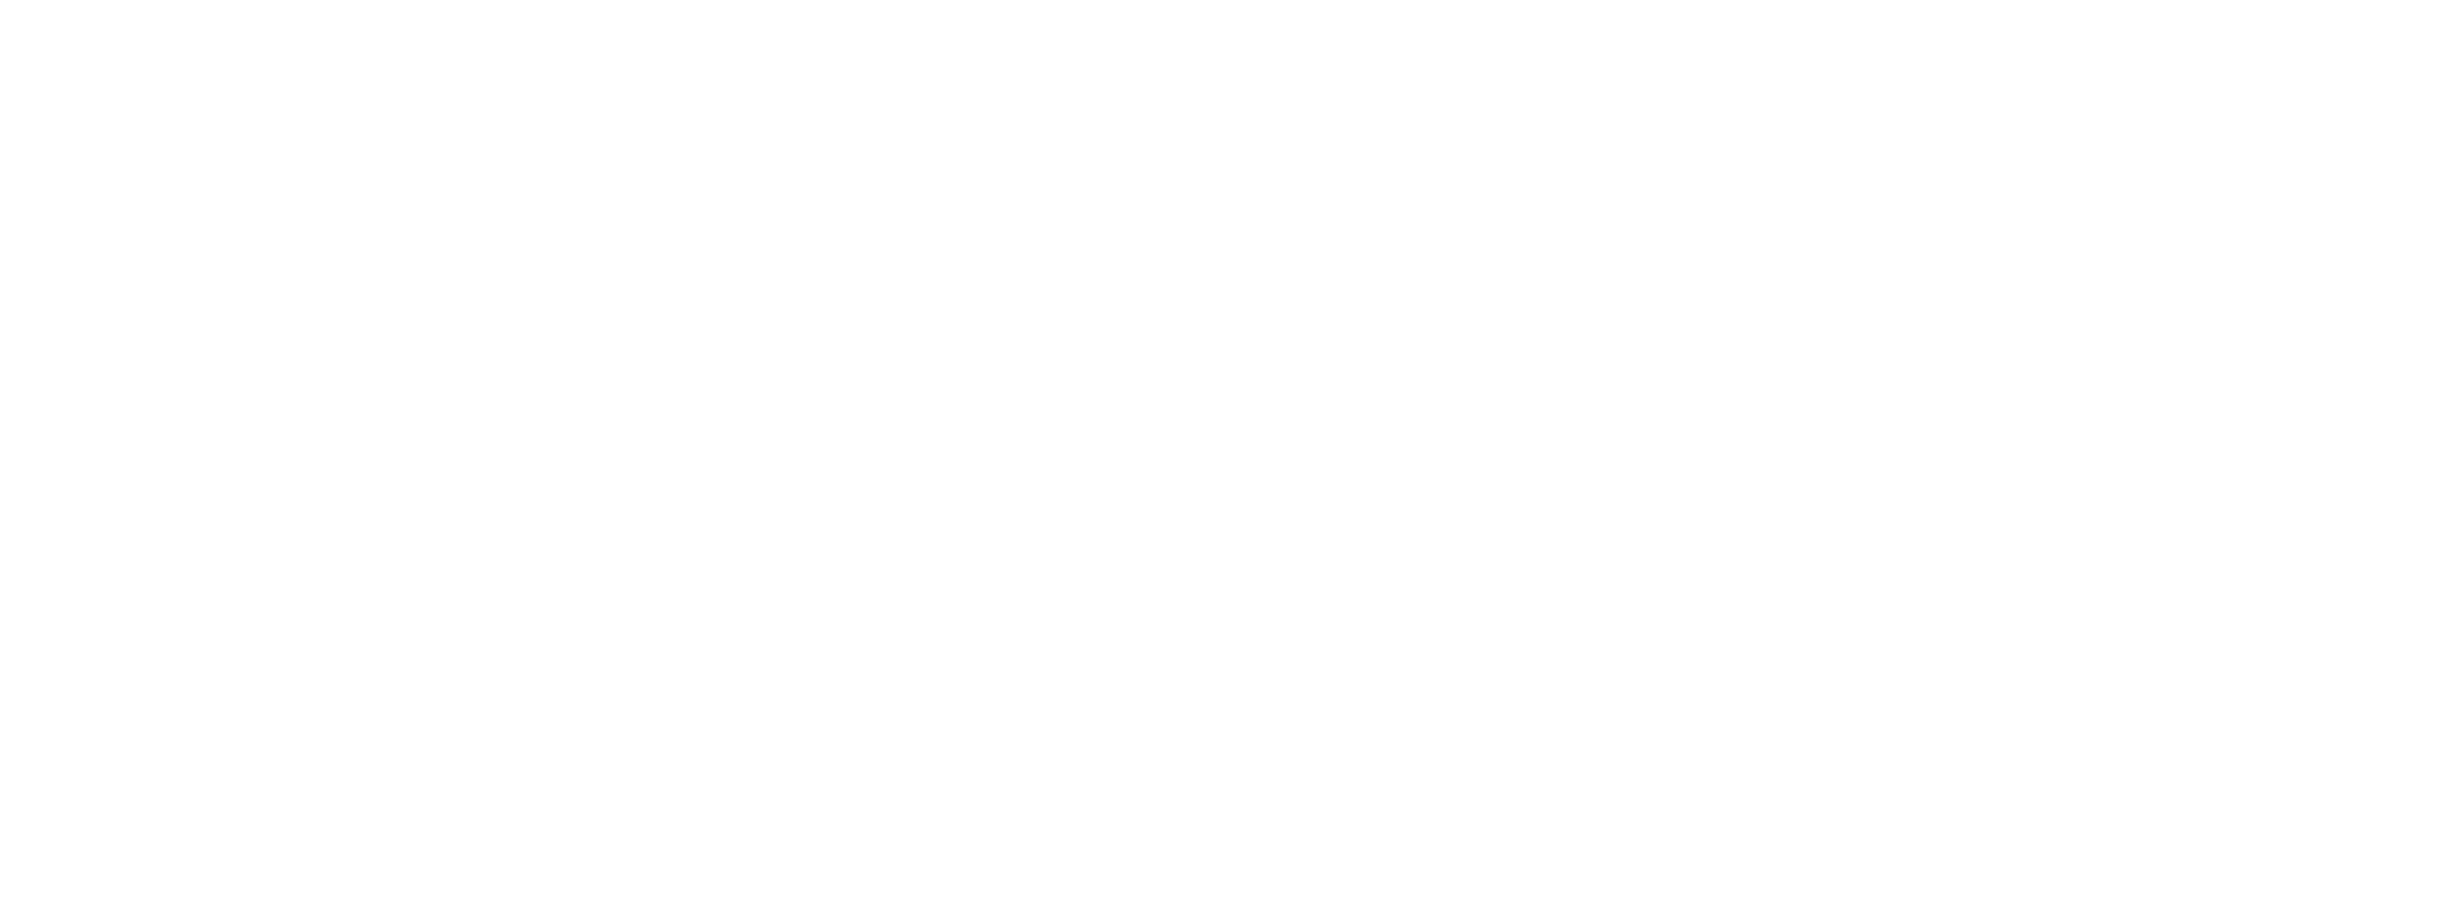 ChannelPro Insights